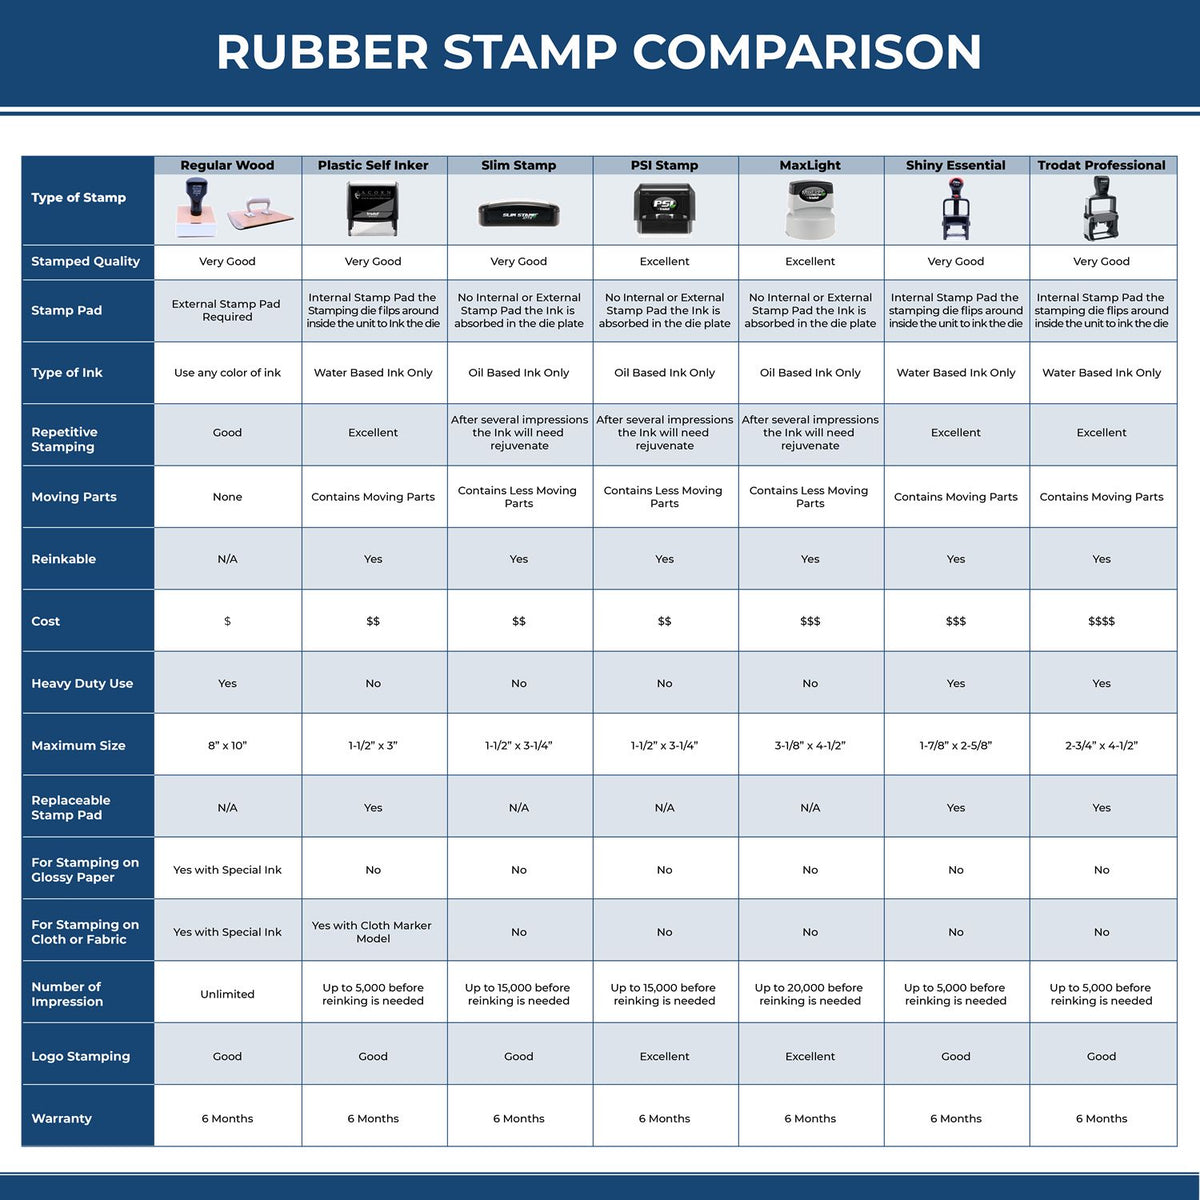 Self-Inking Check Your Work Stamp 4802S Rubber Stamp Comparison